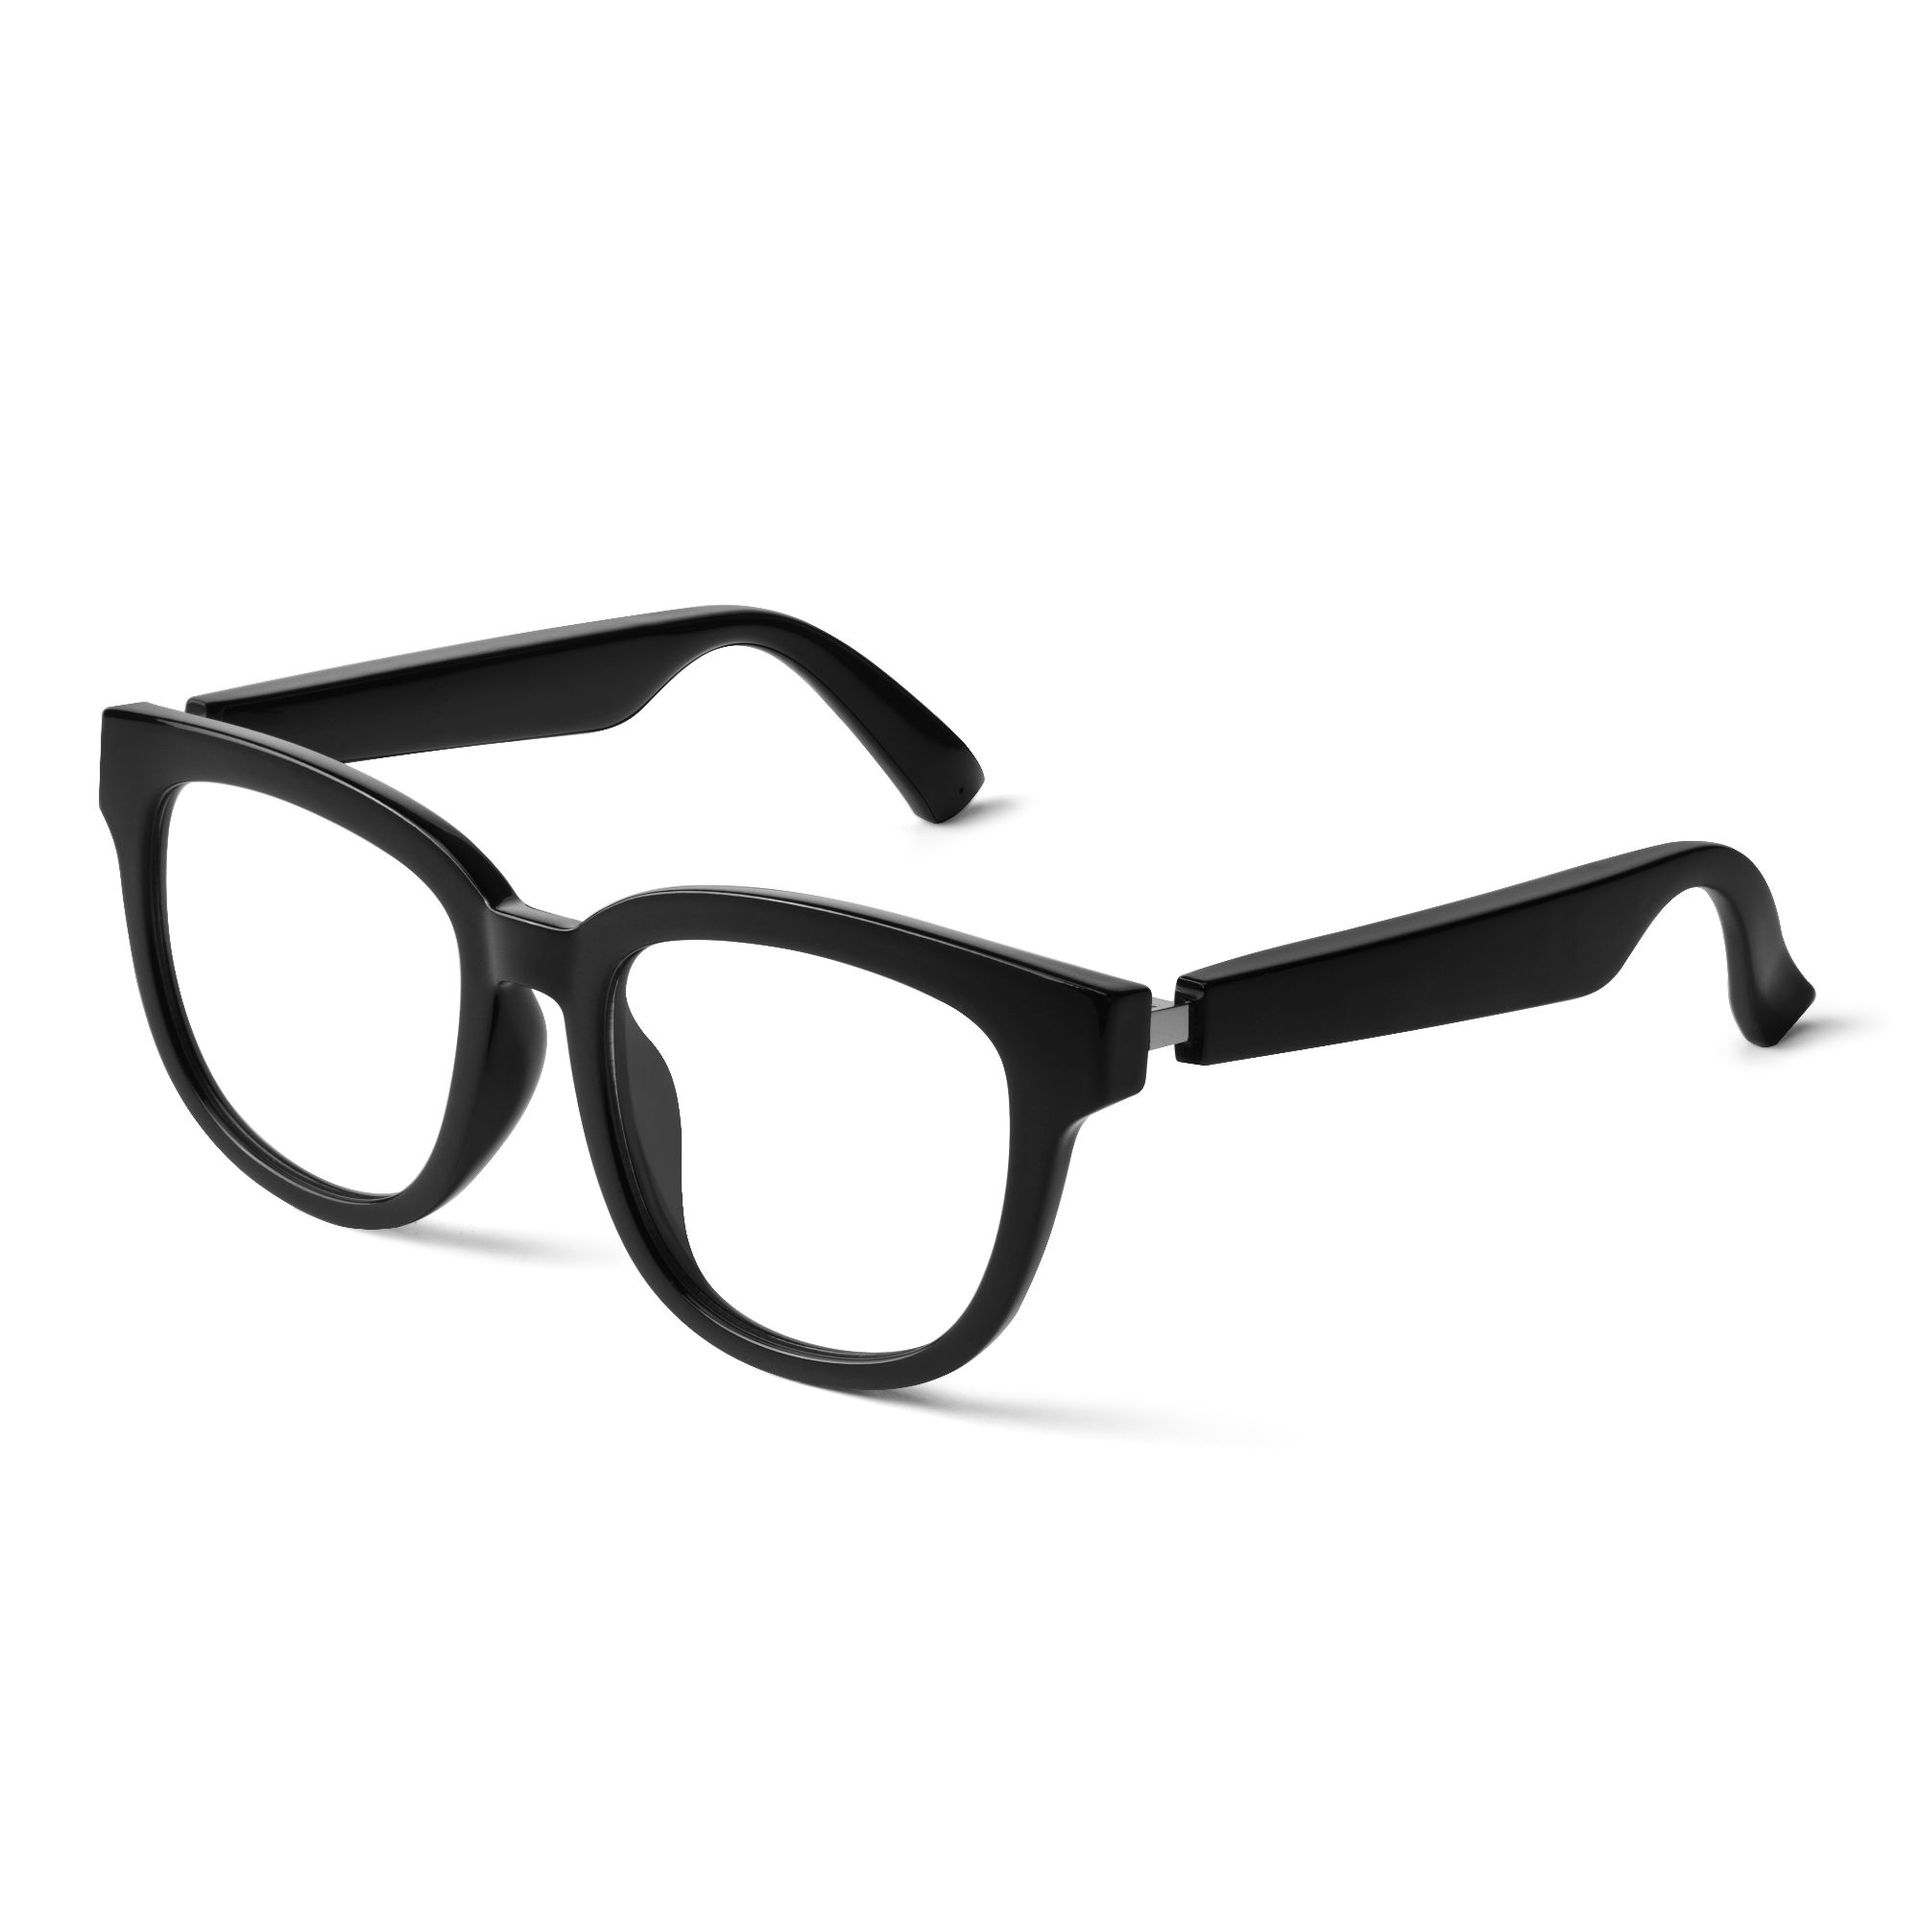 Manufactor Direct selling new pattern Bluetooth intelligence glasses Open invisible touch Conversation music glasses Can be equipped with myopia